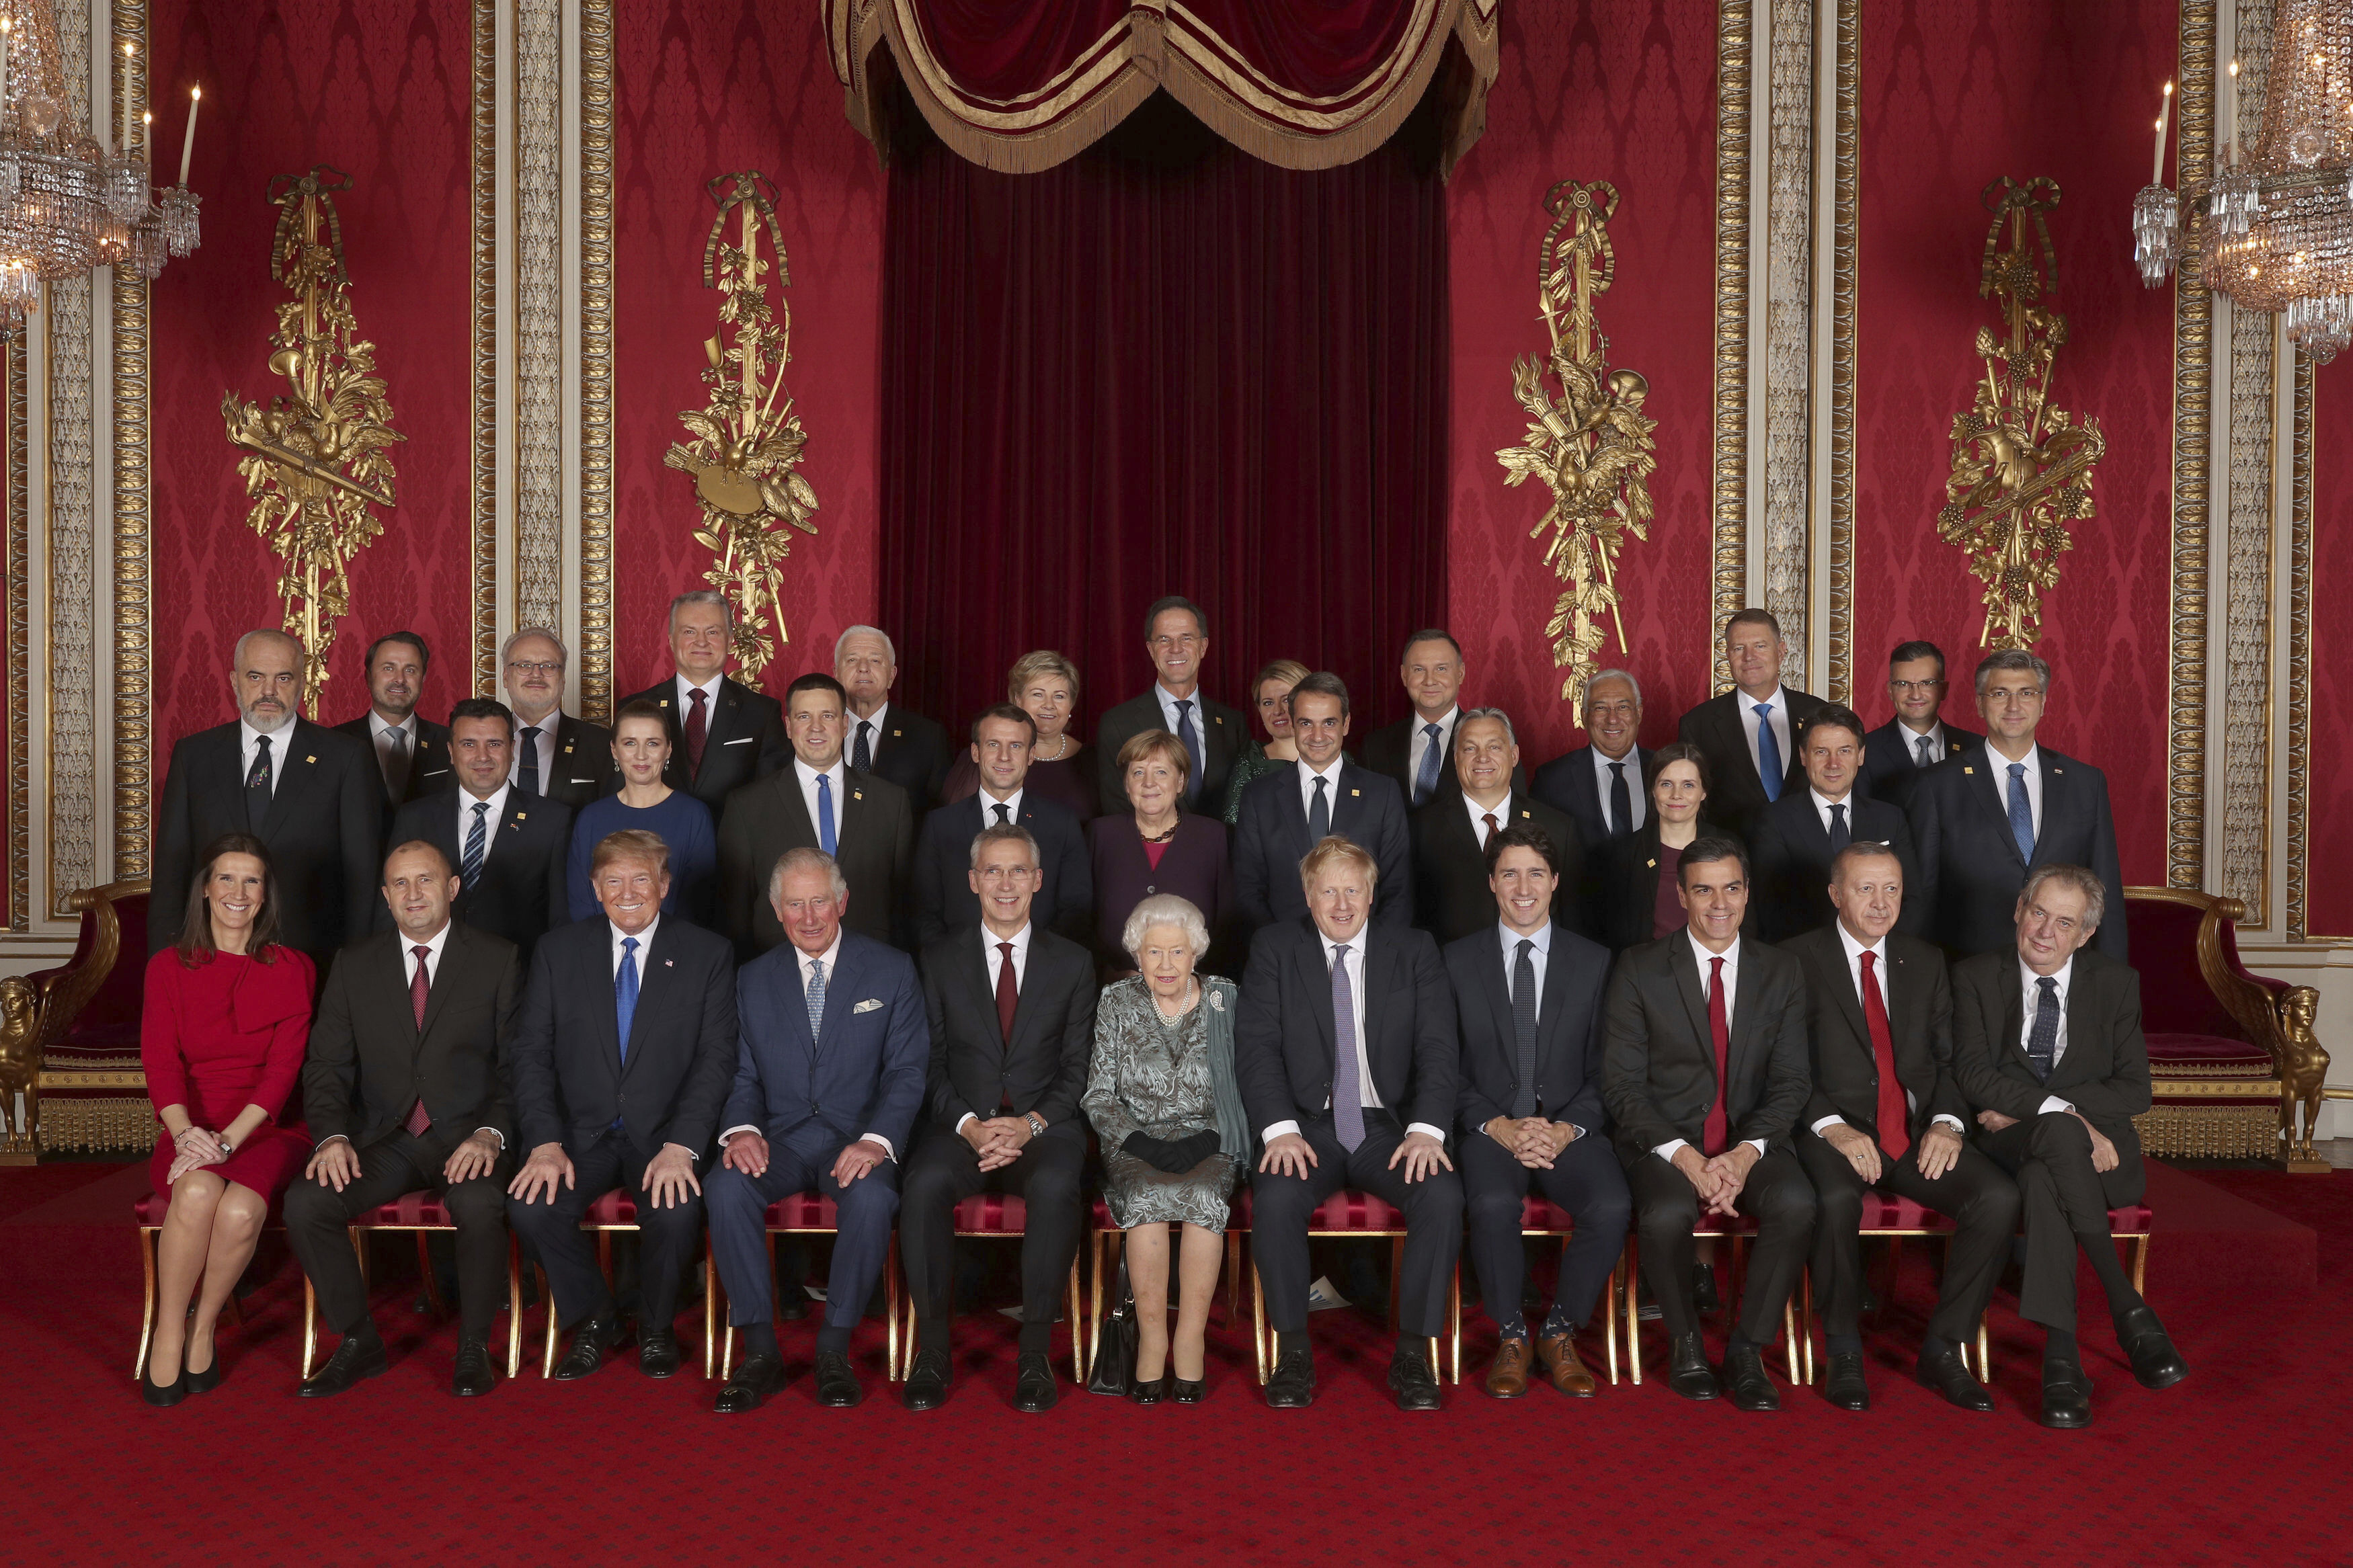 Leaders of the NATO alliance countries, and its secretary general, join Britain's Queen Elizabeth II and Prince Charles the Prince of Wales, during a reception at Buckingham Palace in London on December 3, 2019